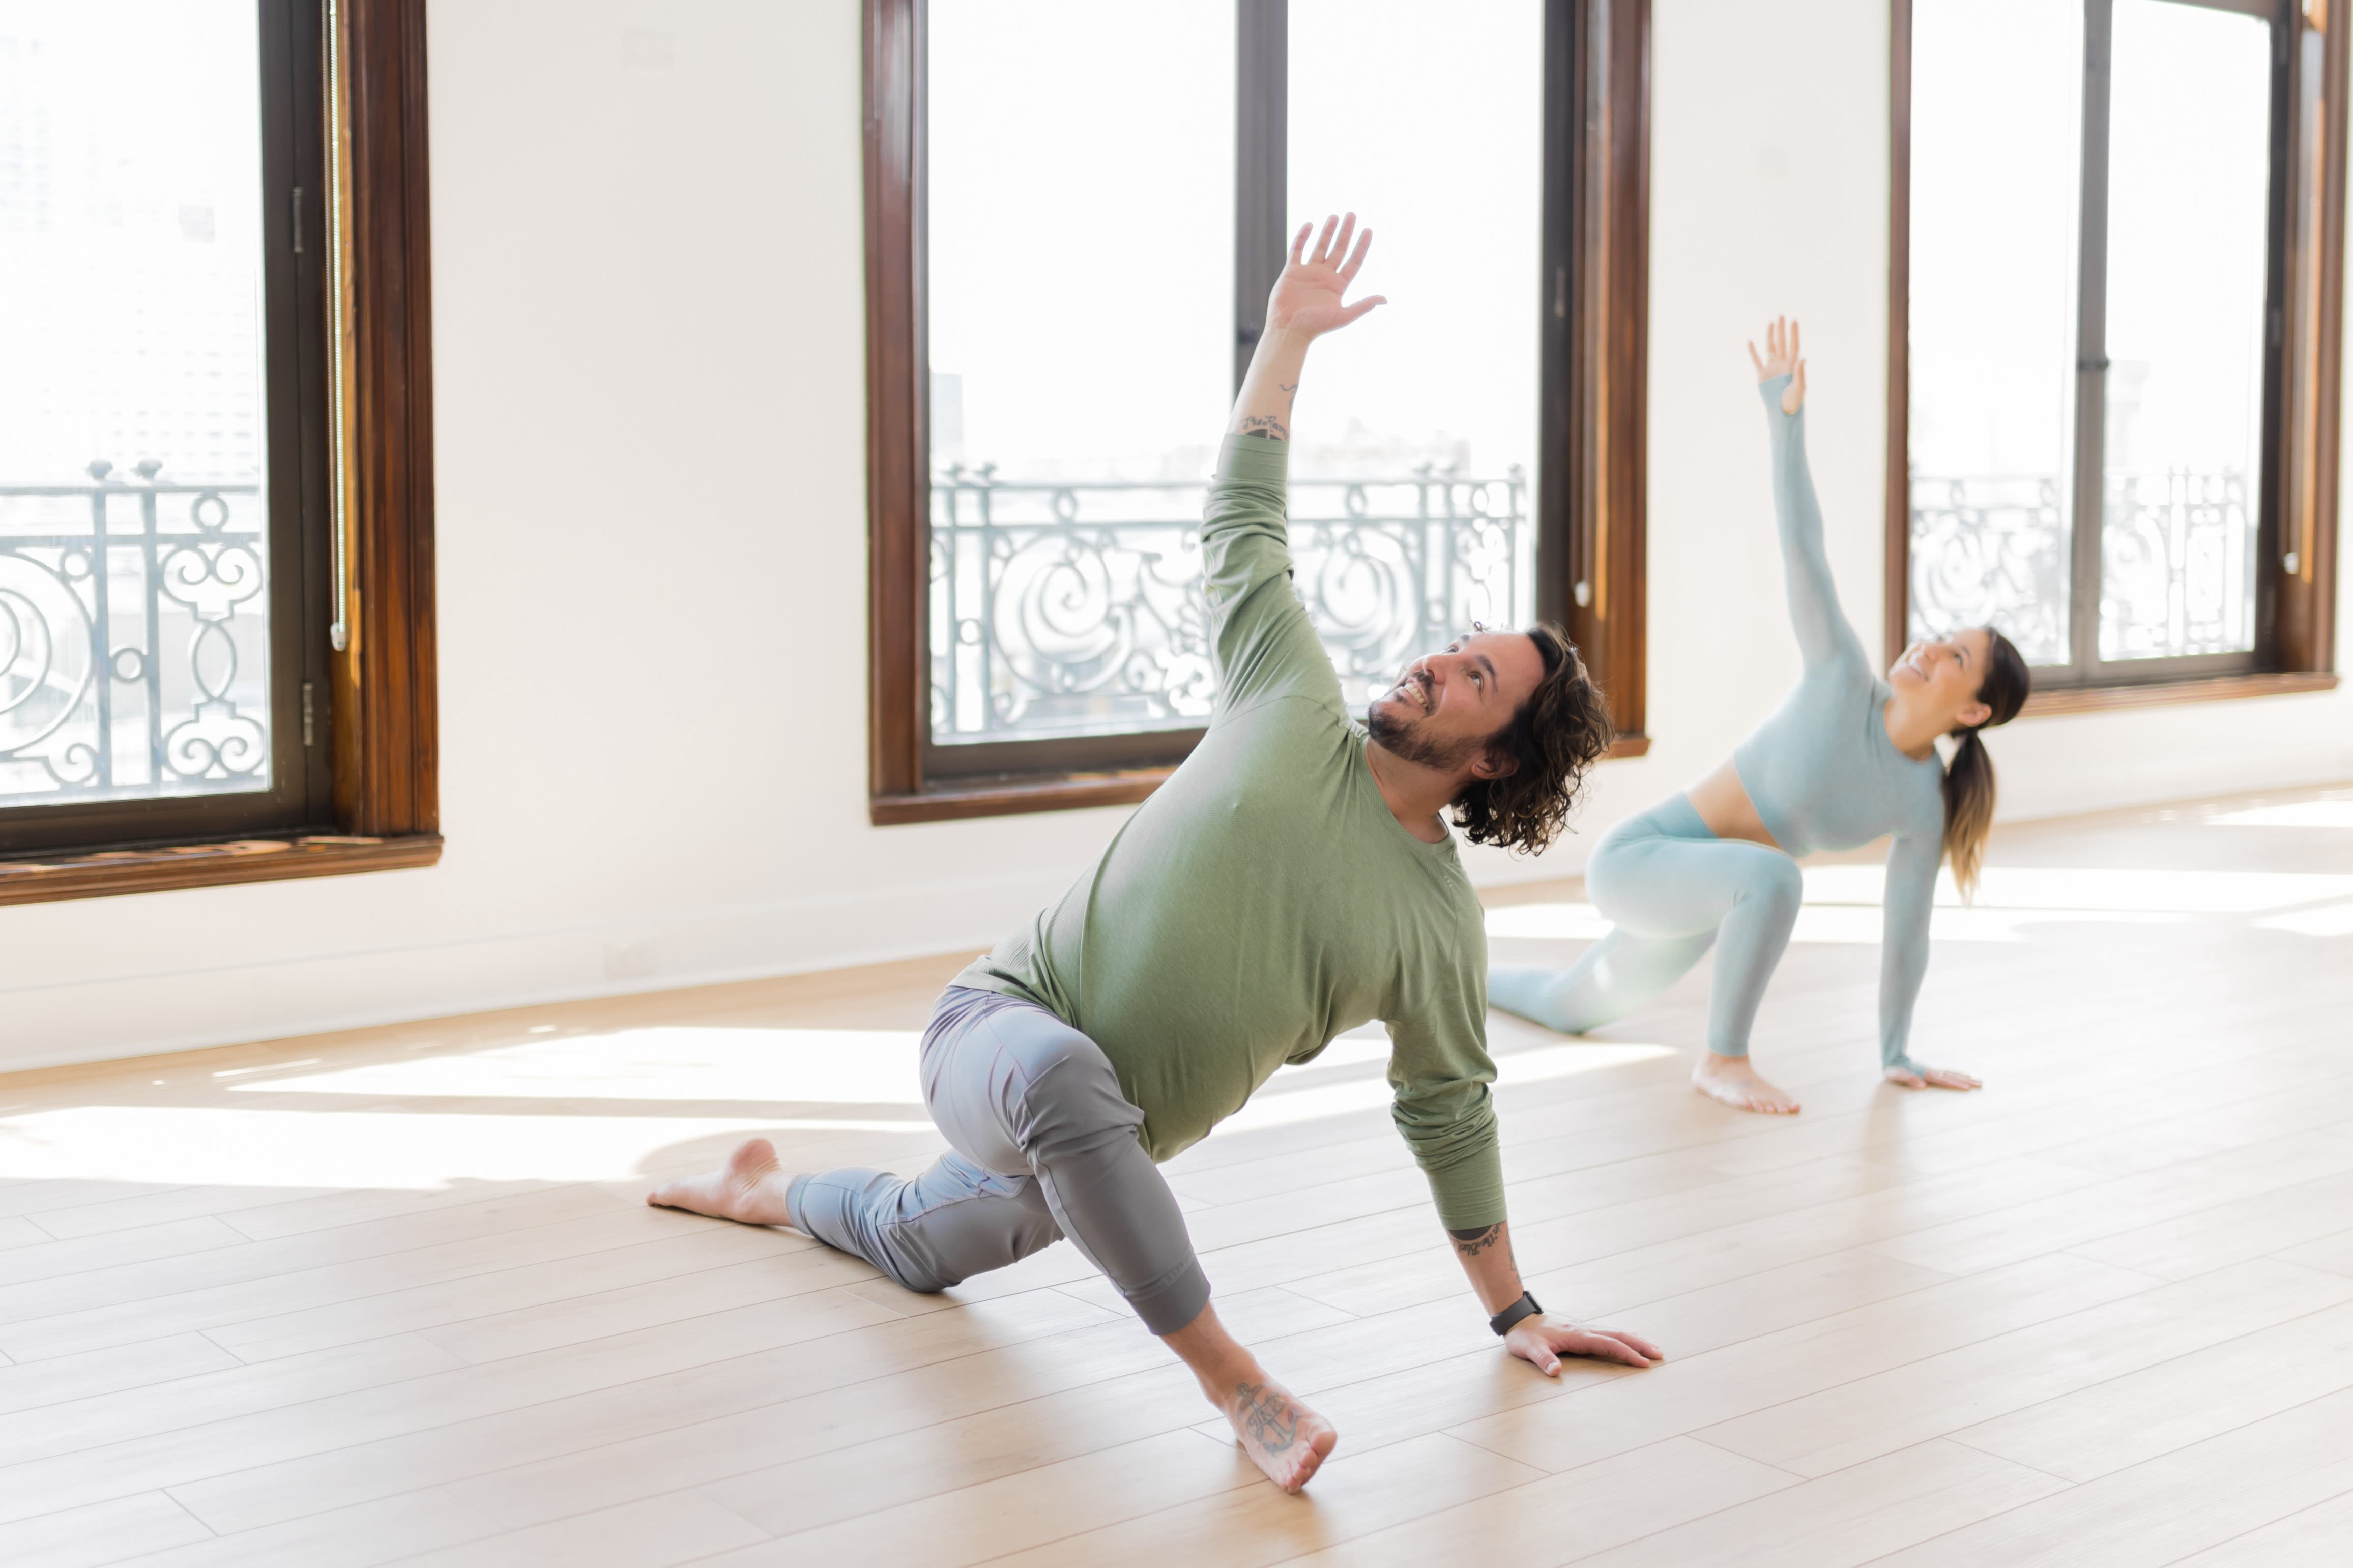 Our Yoga Place: Read Reviews and Book Classes on ClassPass